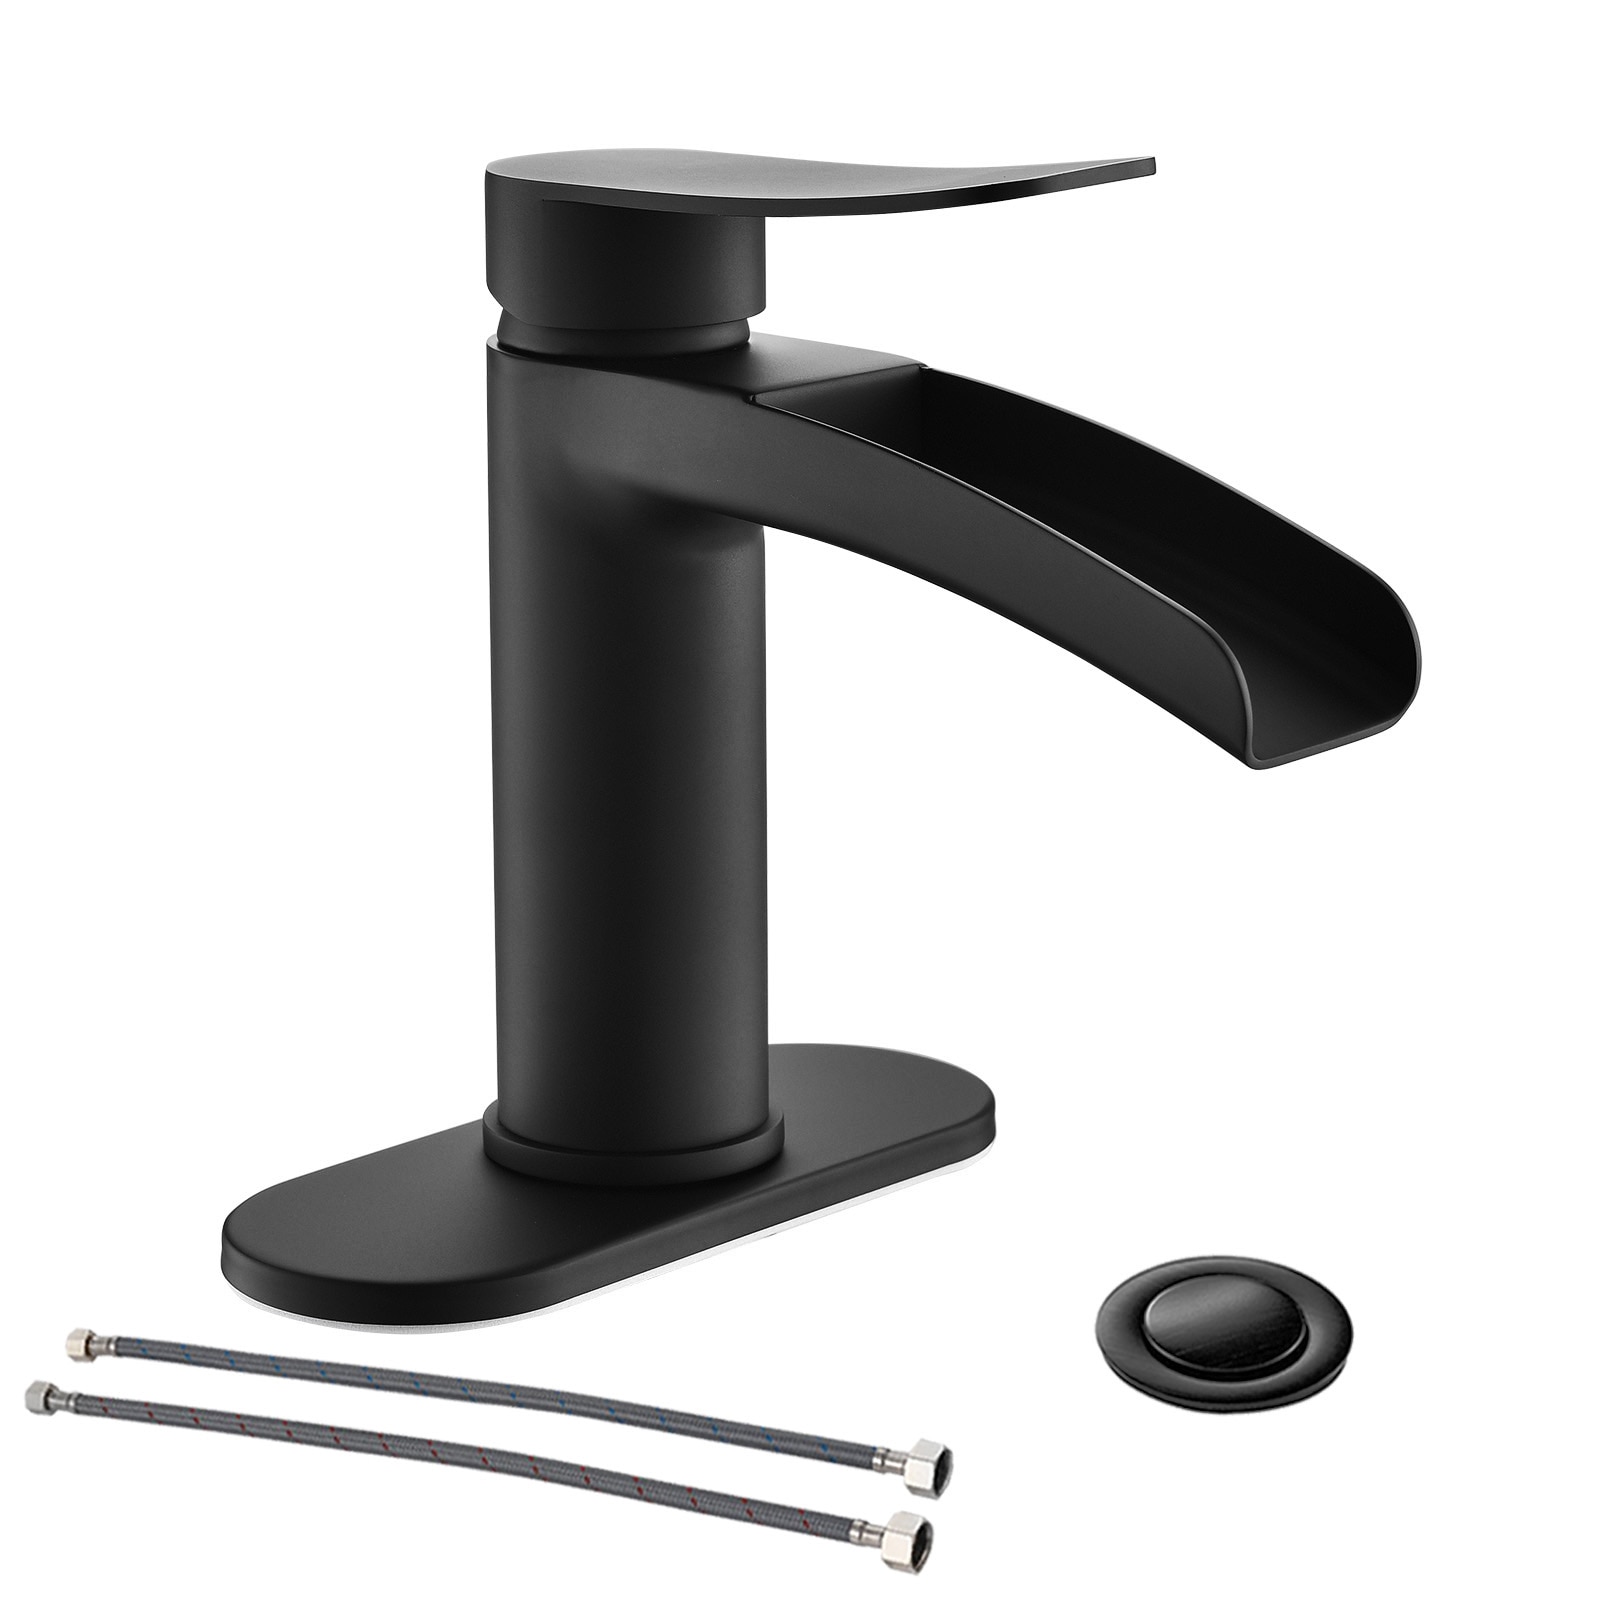 4-in minispread Bathroom Sink Faucets at Lowes.com